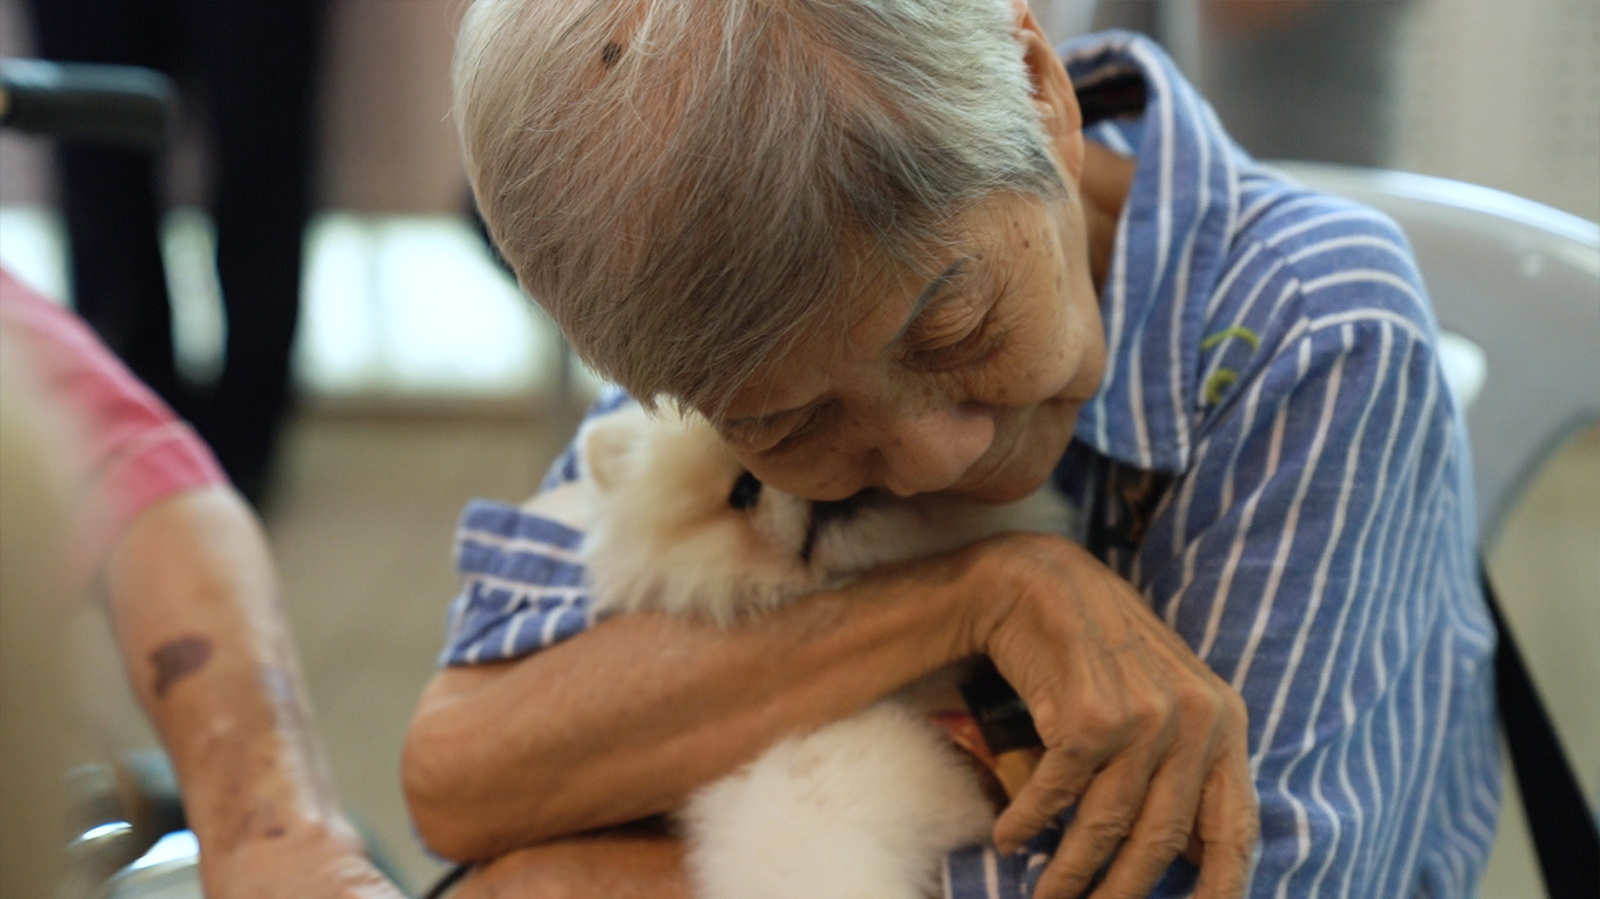 Therapy Dogs in SG: Bringing paws for comfort to those who need it